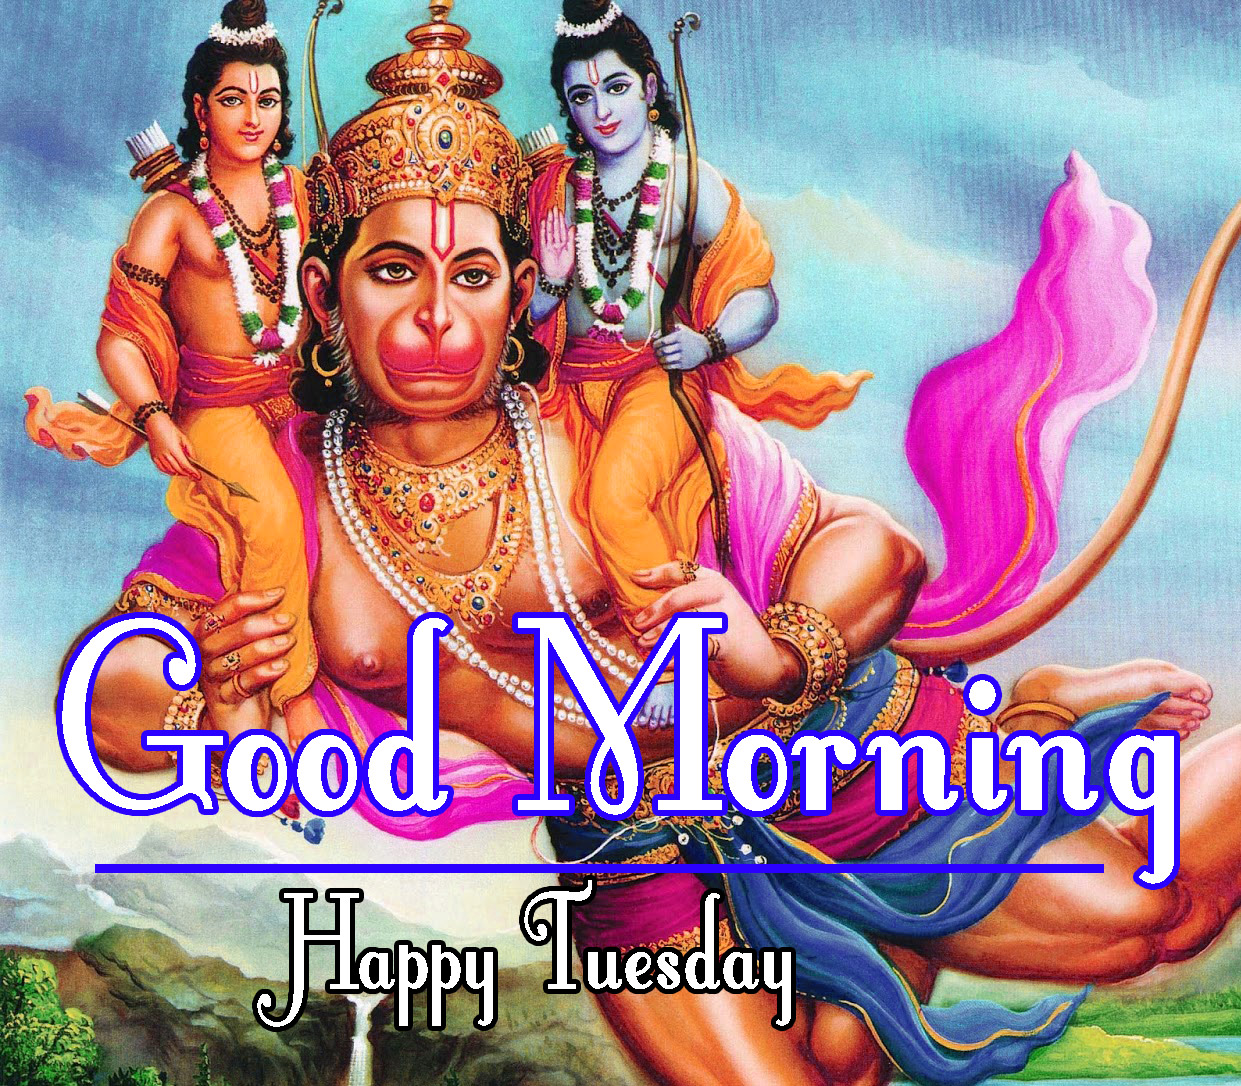 tuesday good morning Images Download 